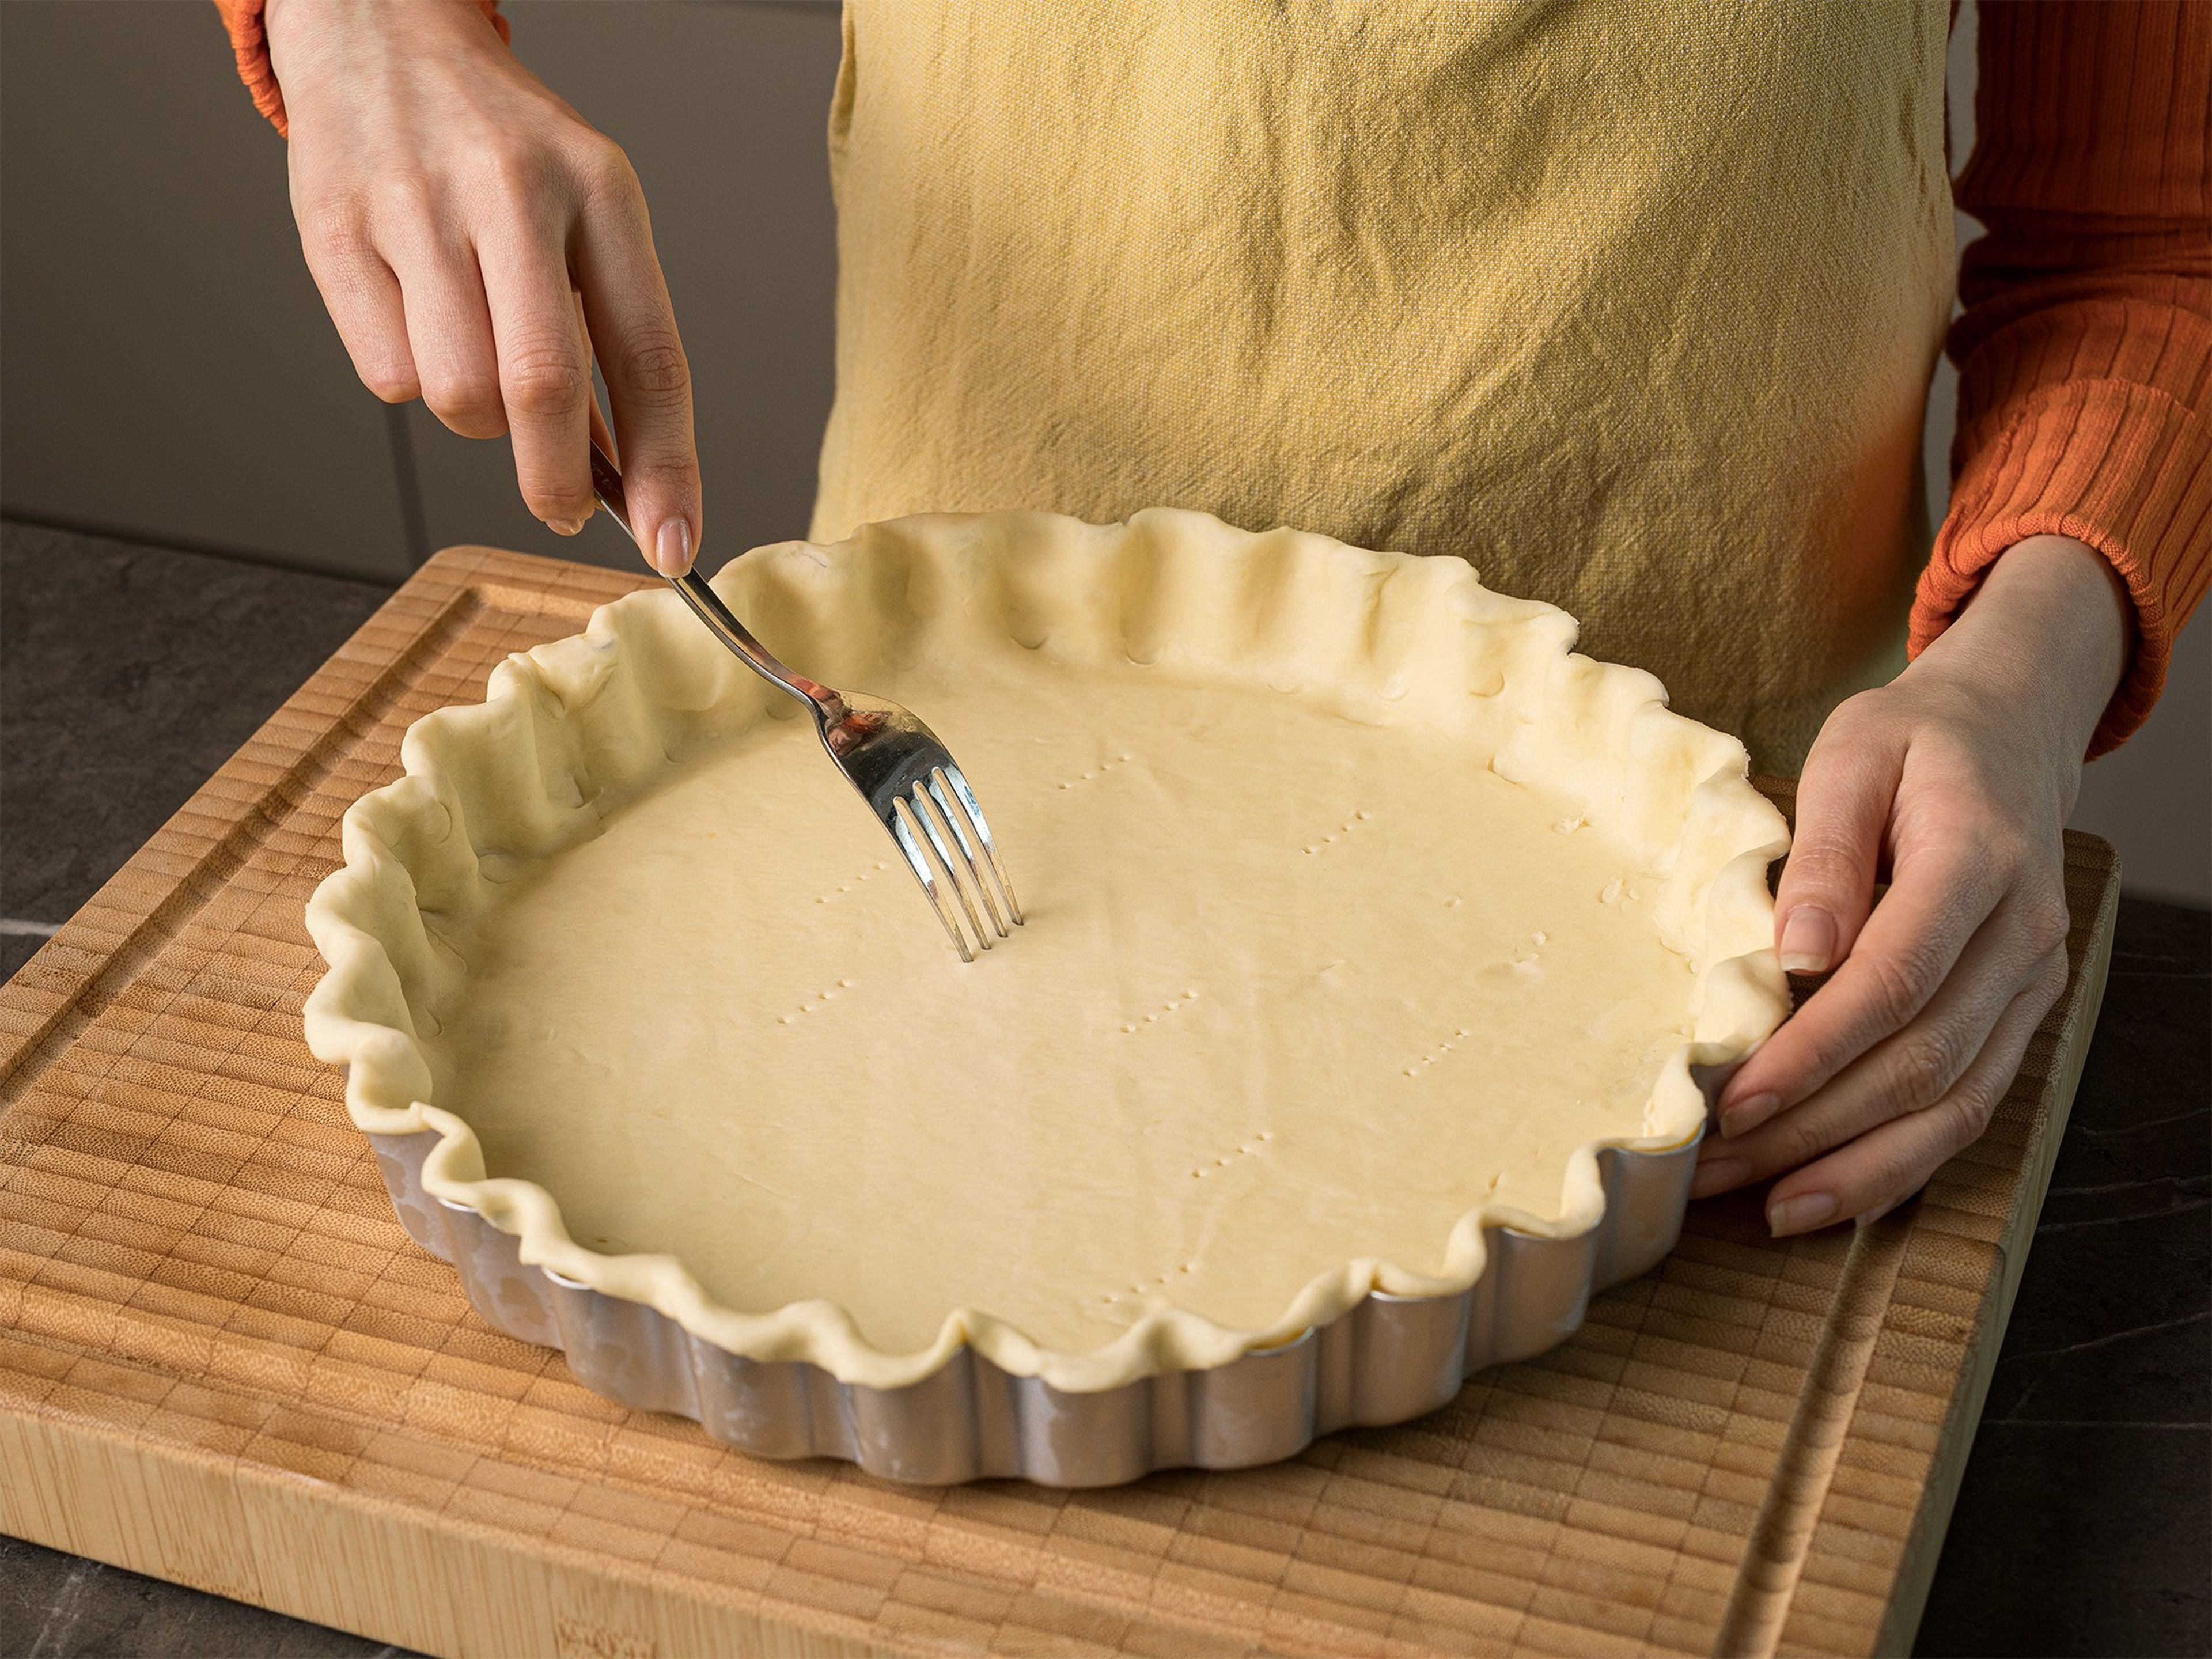 Preheat oven to 200°C/392°F (180°C/356°F for convection oven). Lightly grease a tart pan (approx. 28 cm/11 in.) with oil. Place the dough in the tart pan and press down the dough along the sides. Prick the bottom with a fork. Line the dough with parchment paper and pie weights, such as baking beans. Then blind-bake for approx. 20 min., then remove the parchment paper and baking beans and bake again for approx. 10 min.